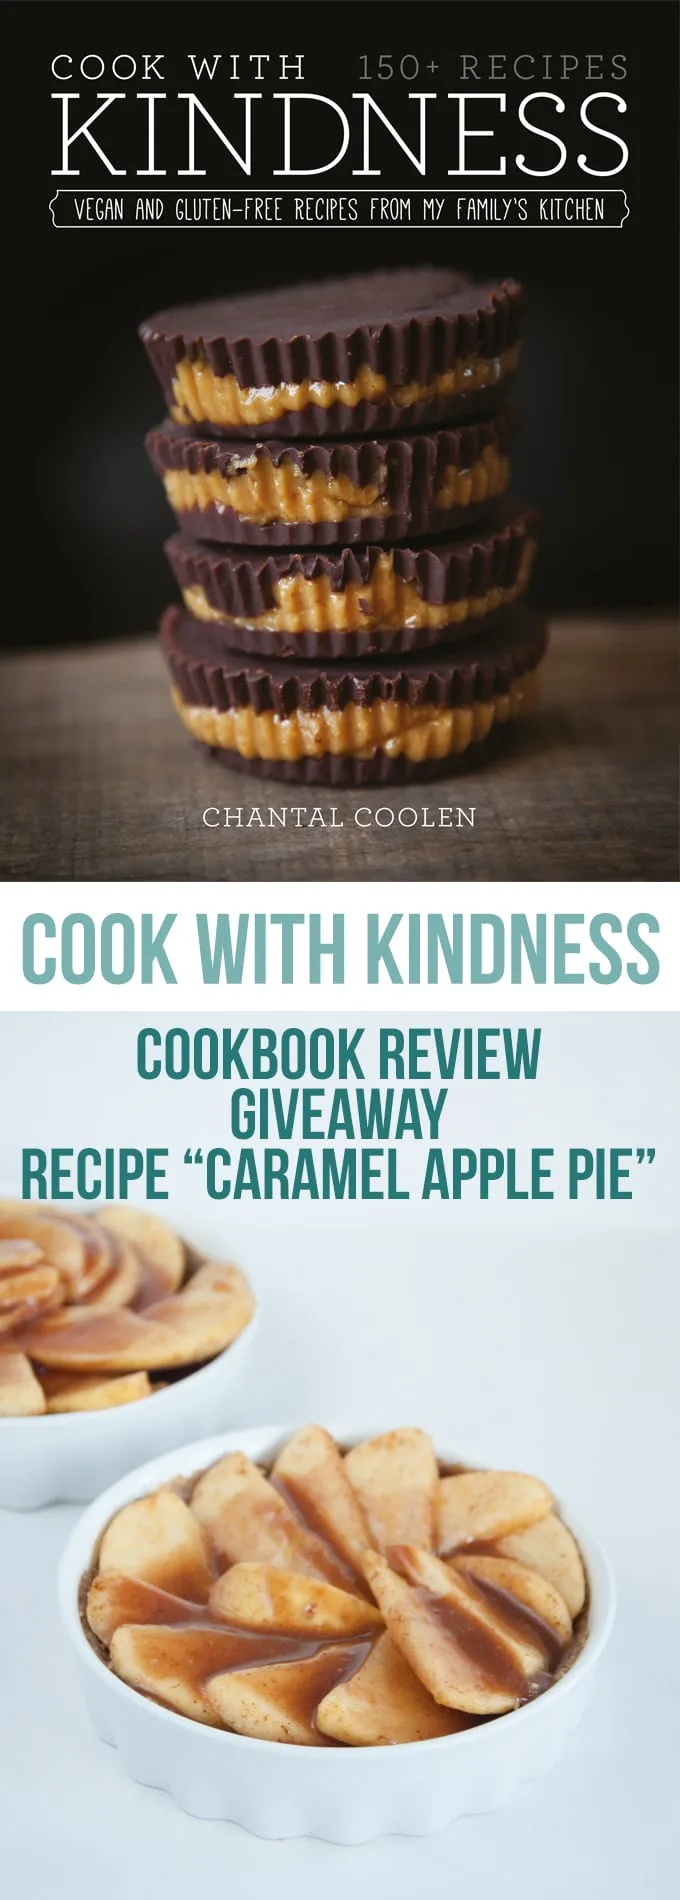 Book Review Cook with Kindness + Giveaway + Caramel Apple Pie